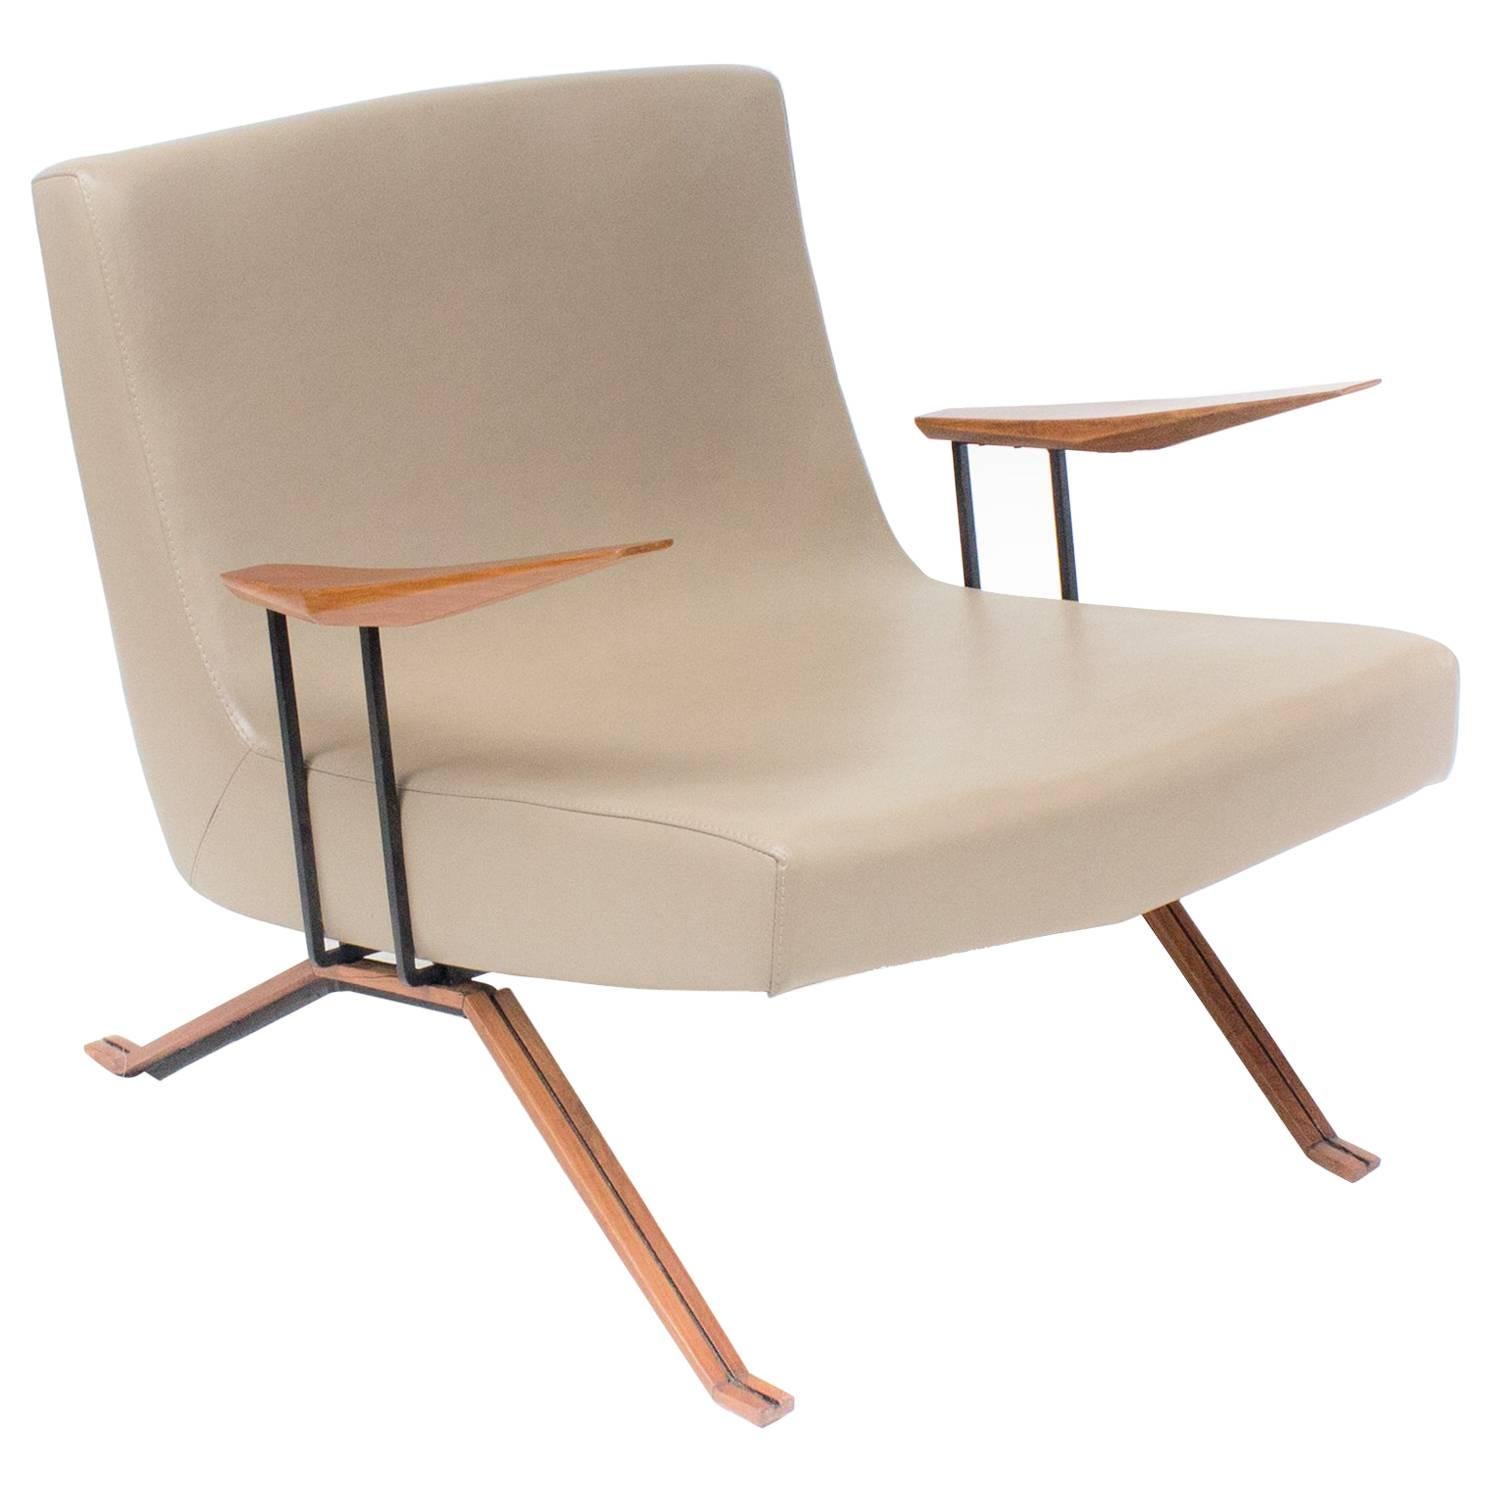 Midcentury brazilian "MP-1" Armchair by Percival Lafer, 1961